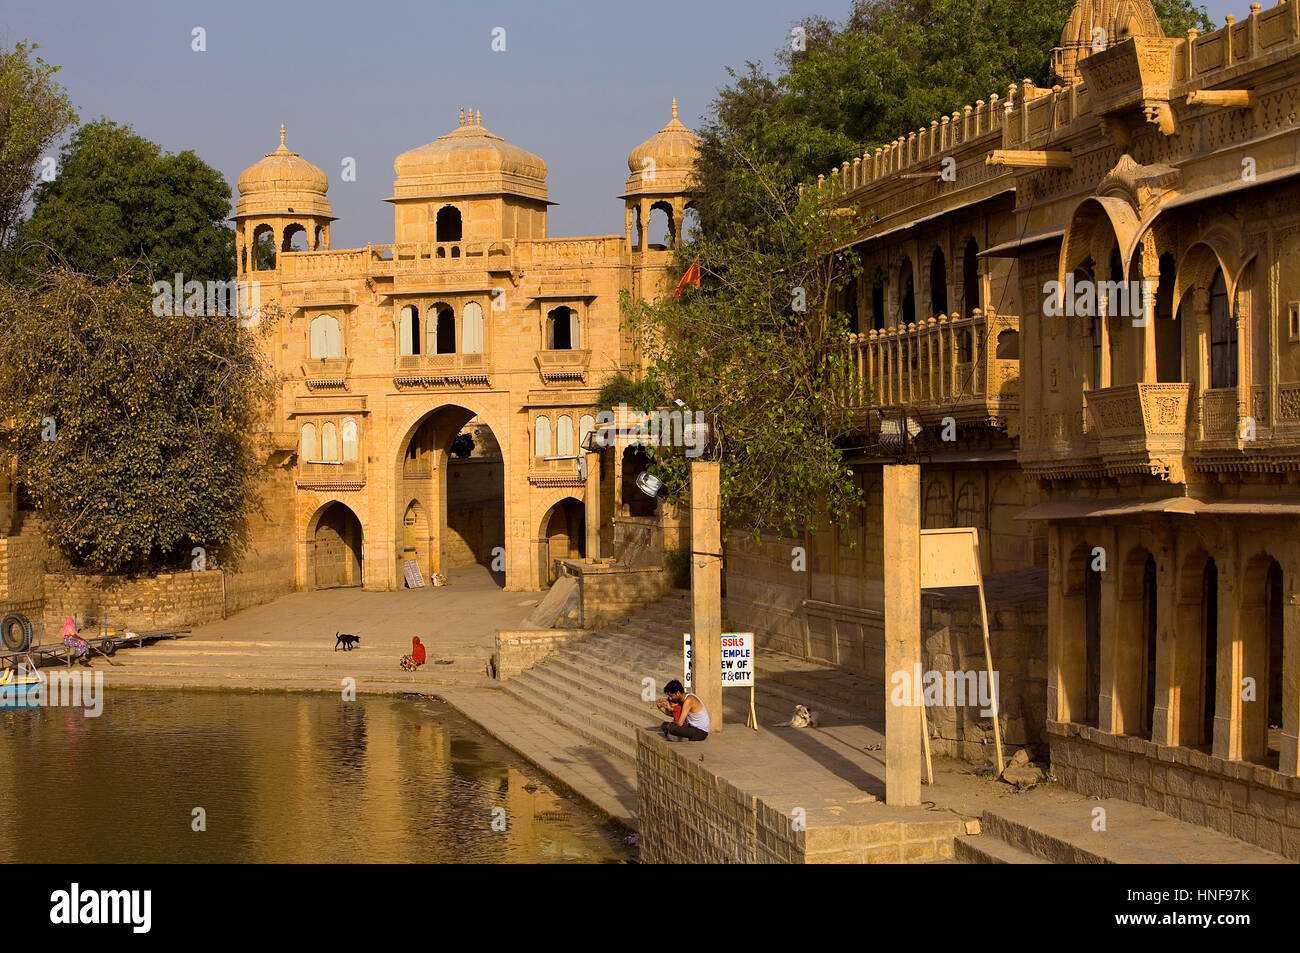 Tilon ki Pol archway in Gadi Sagar, the tank was once the water supply of the city and is surrounded by small temples and shrines, Jaisalmer,Rajasthan Stock Photo